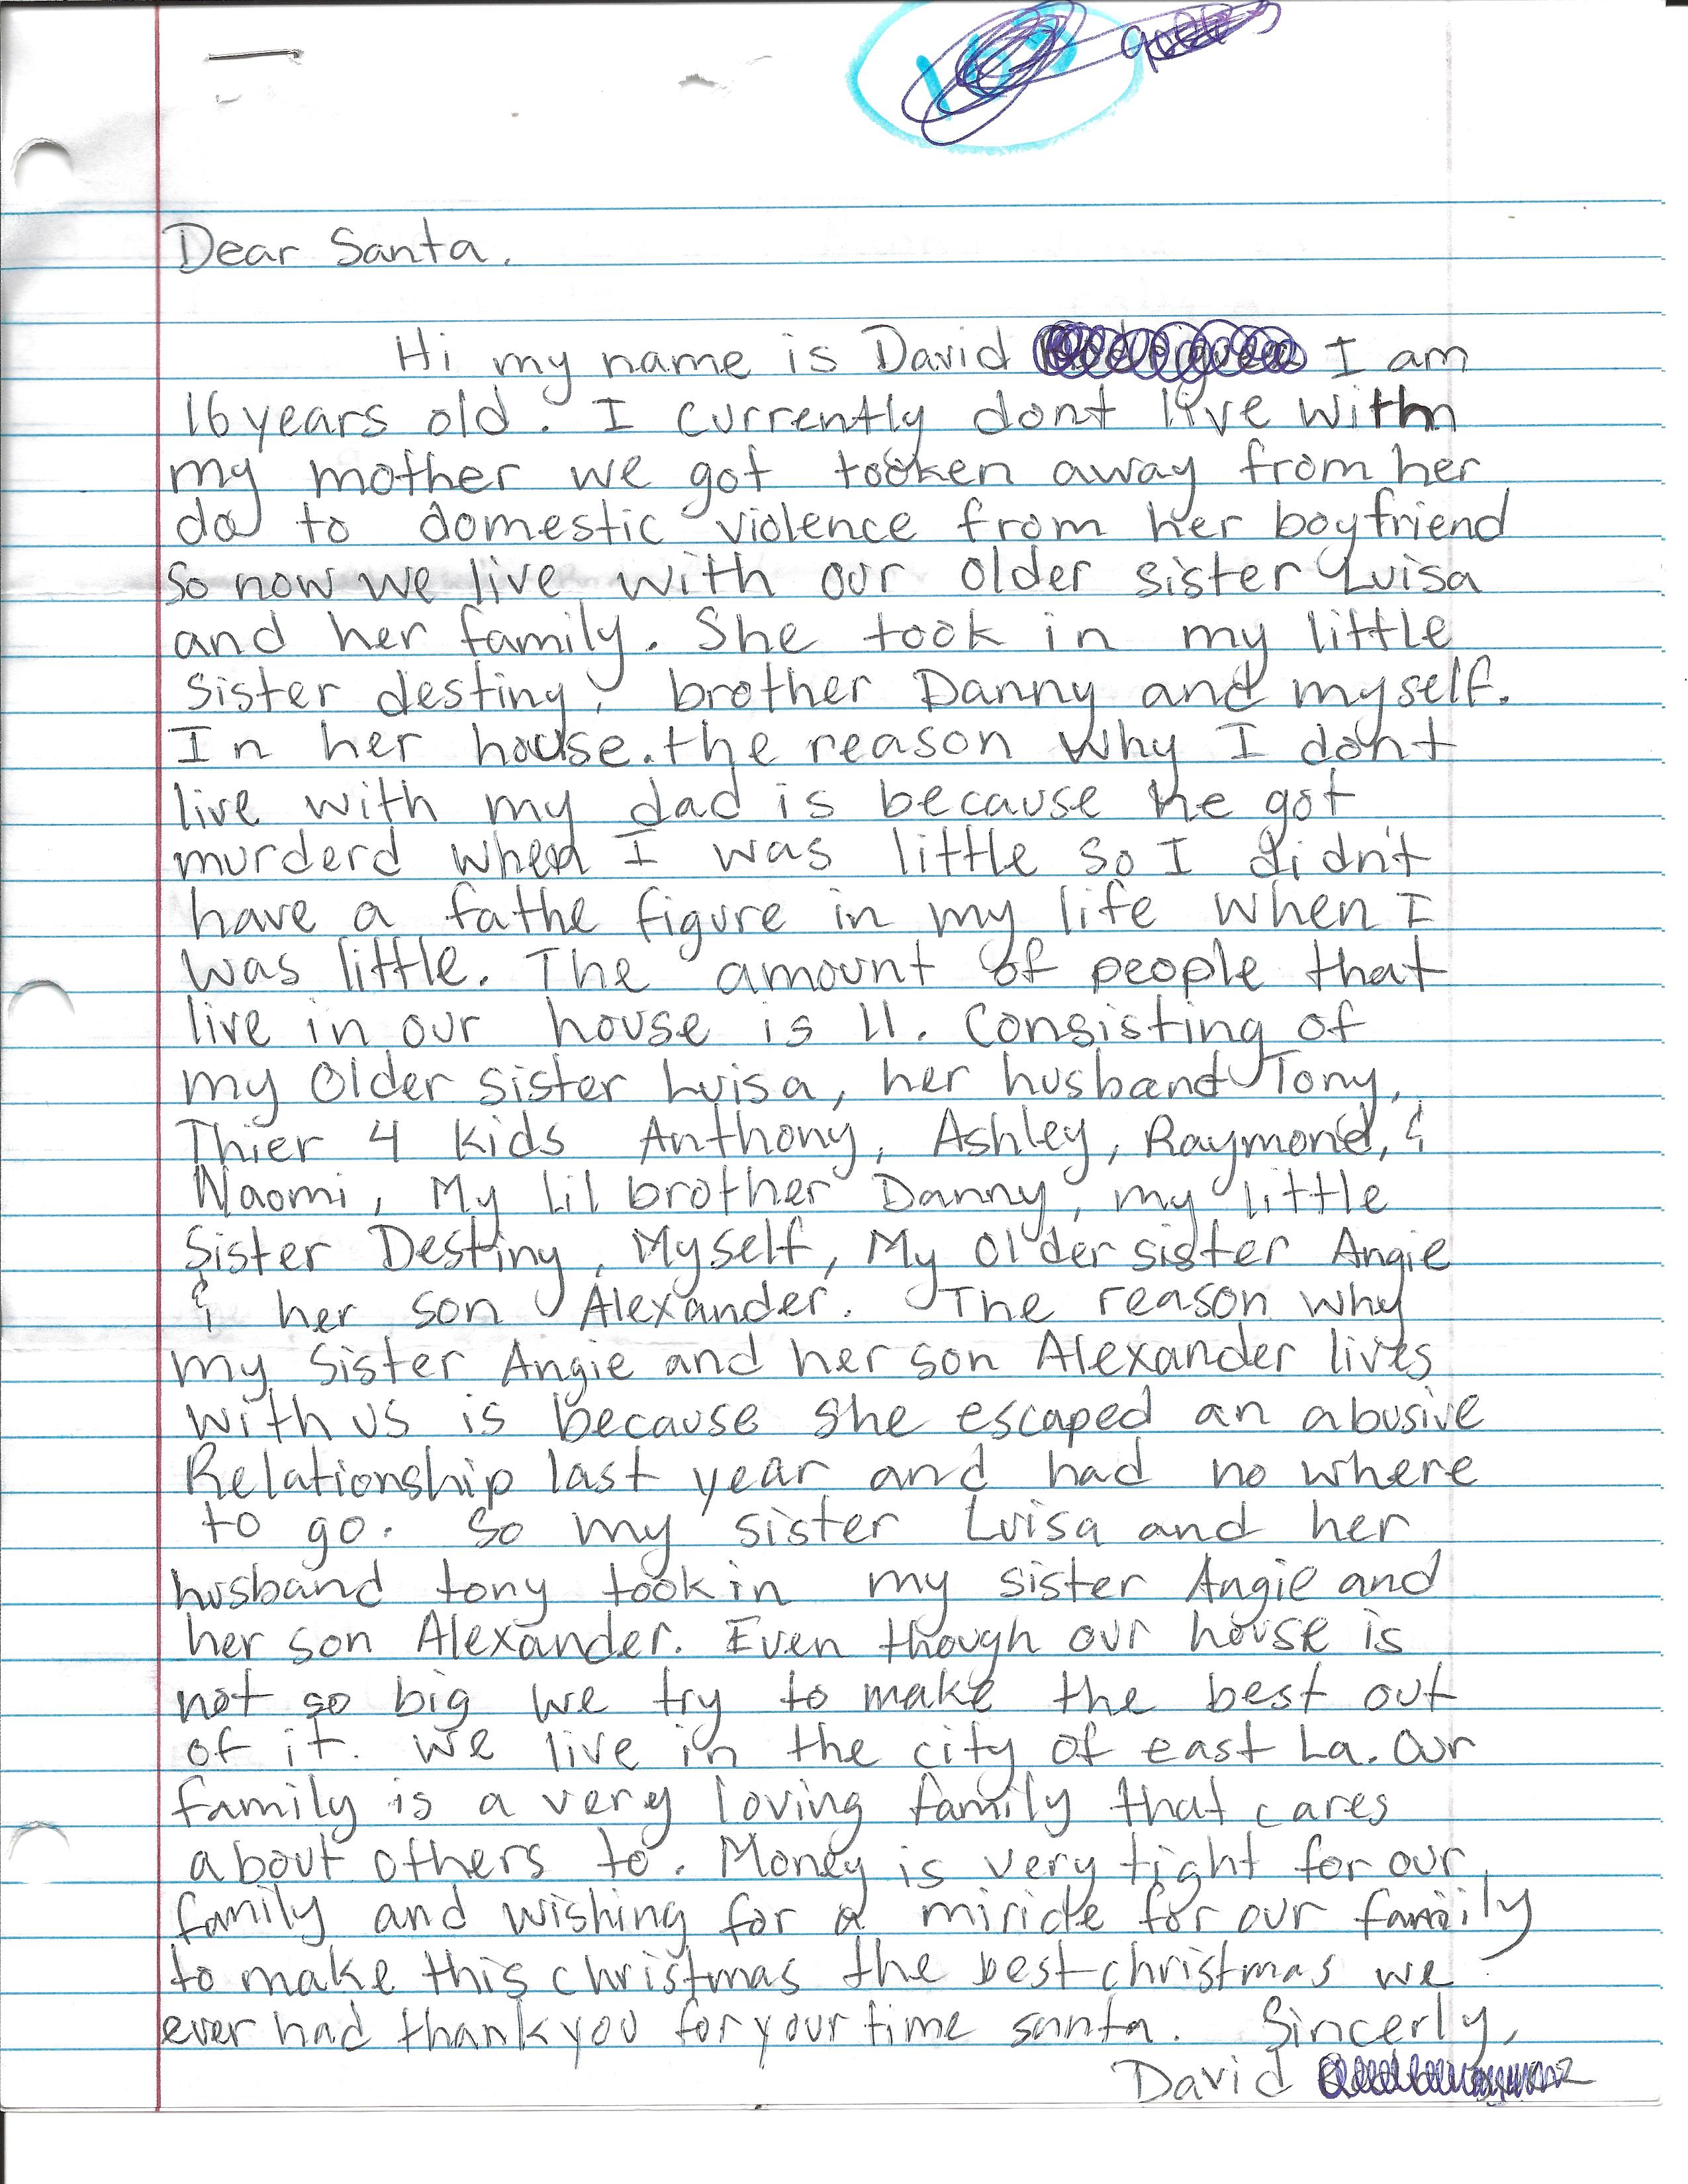 This moving letter was chosen for adoption by an Operation Santa volunteer.